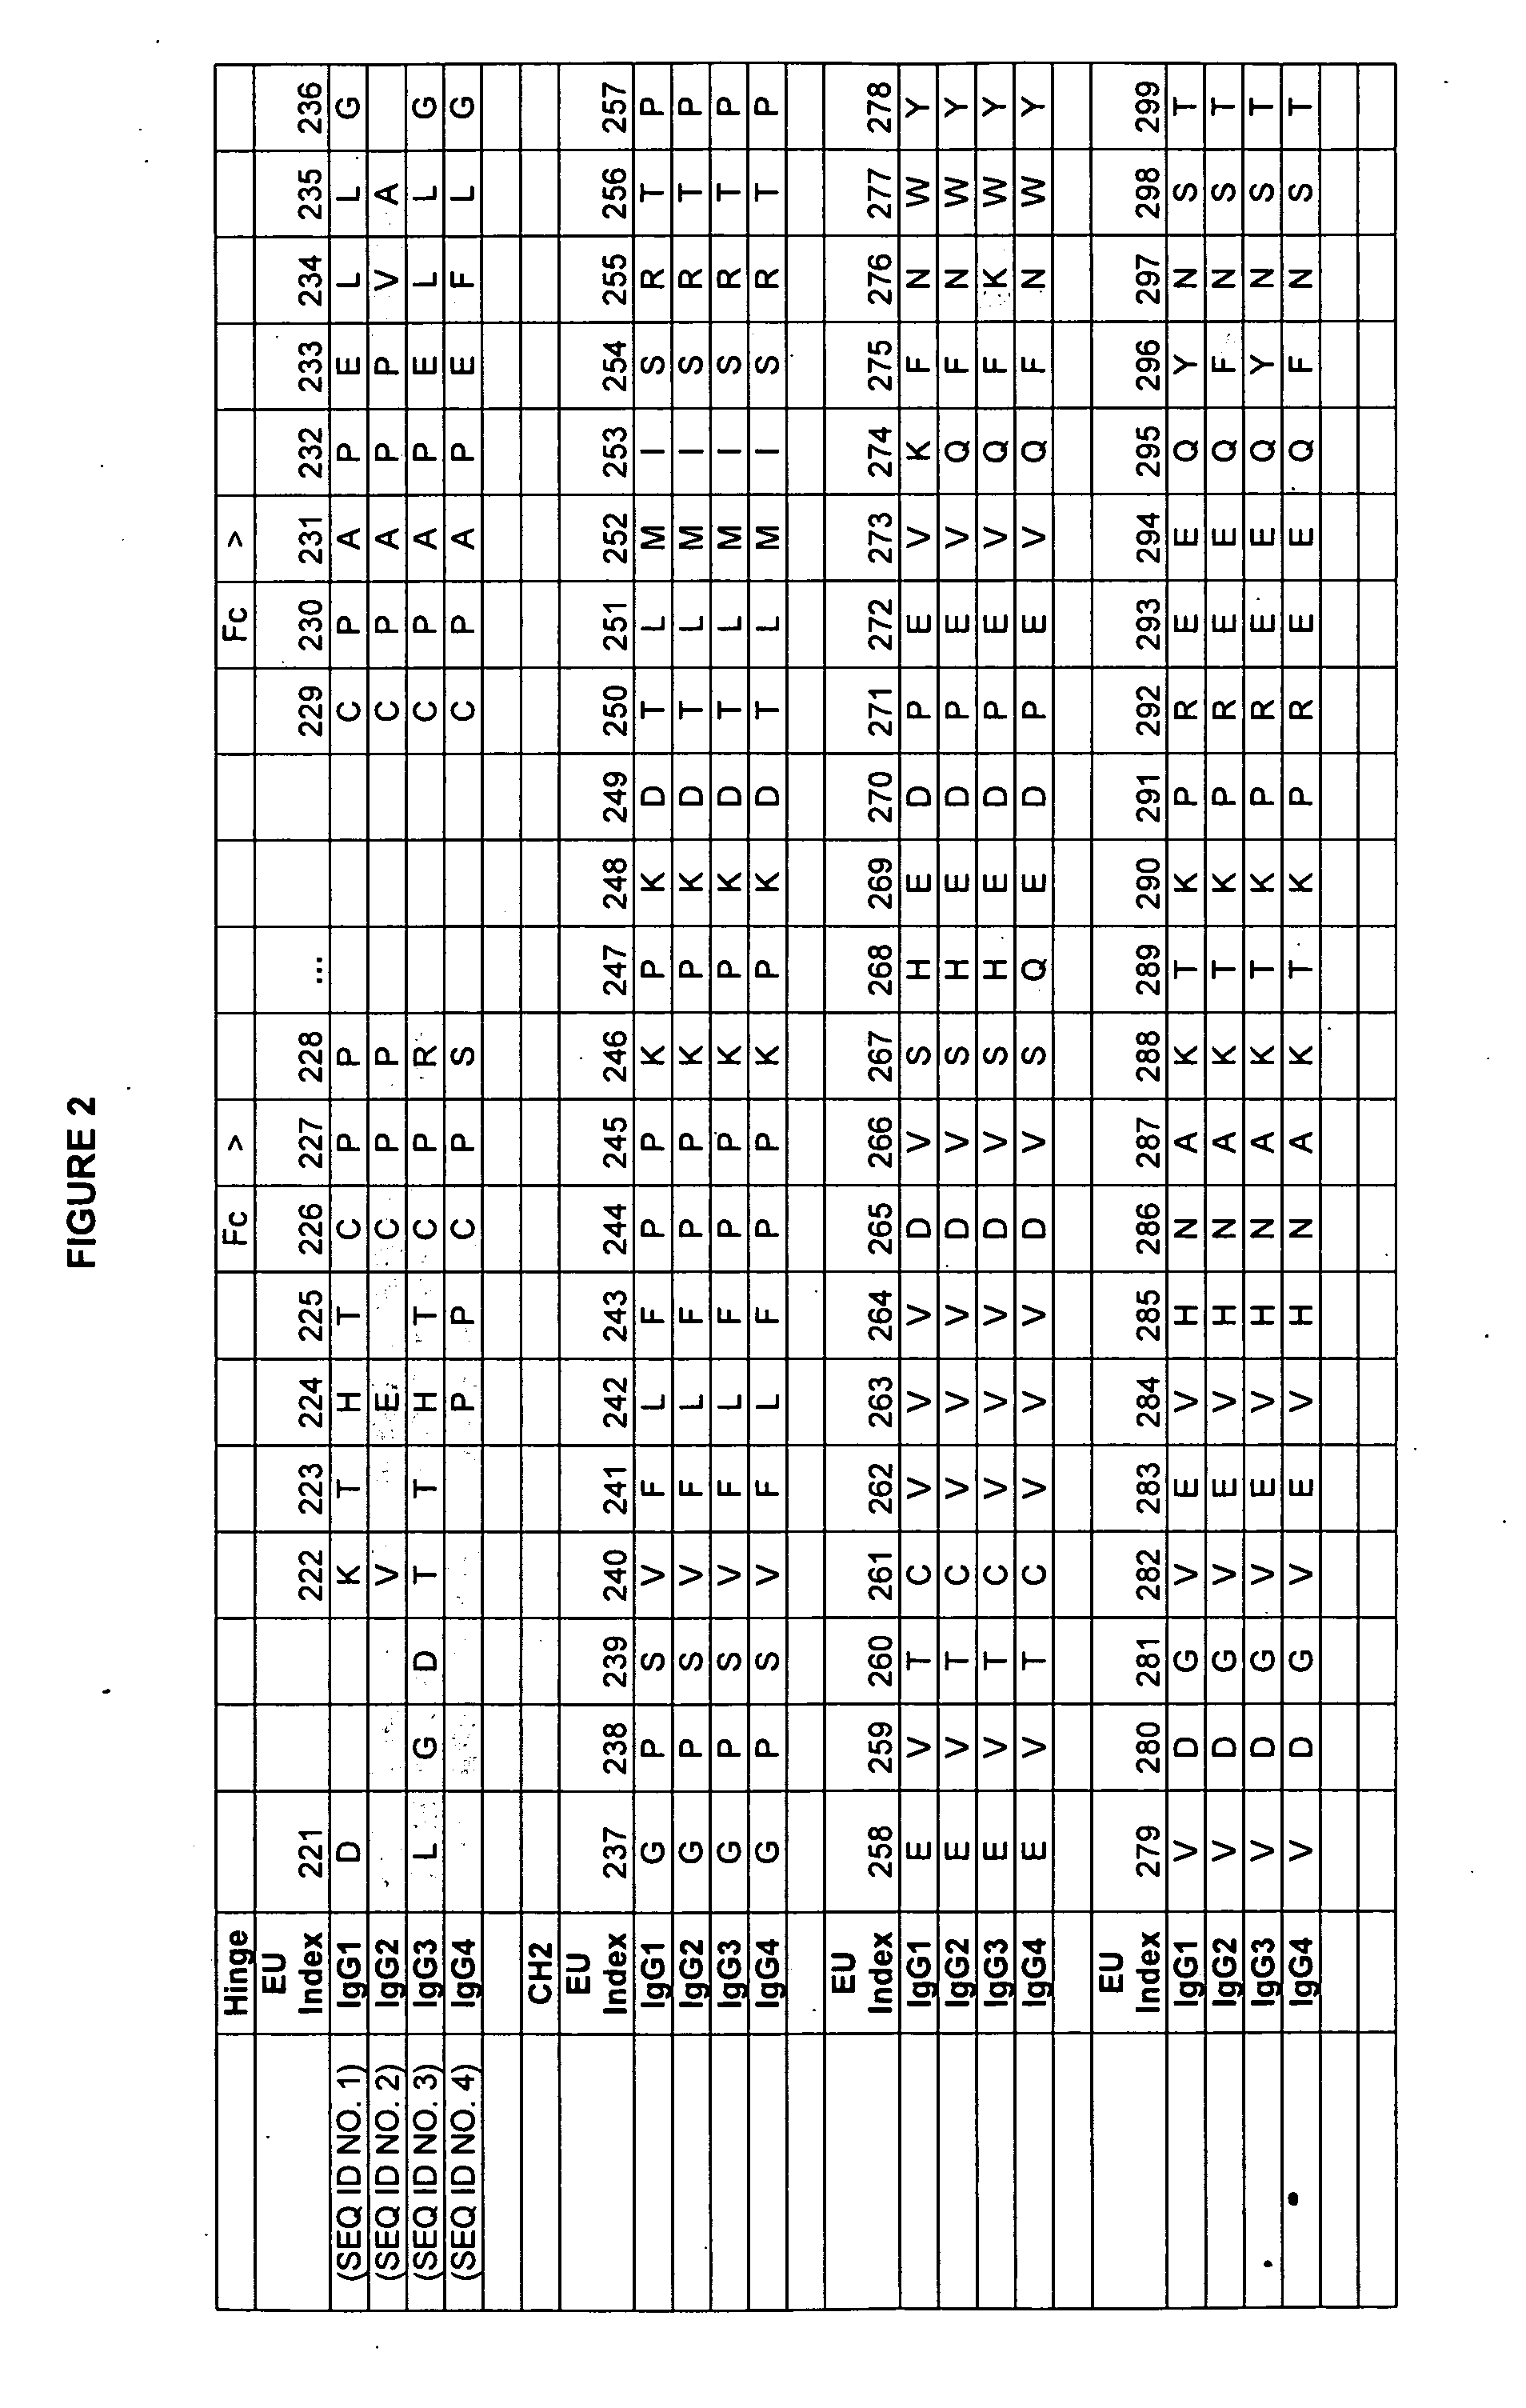 Fc VARIANTS WITH ALTERED BINDING TO FcRn